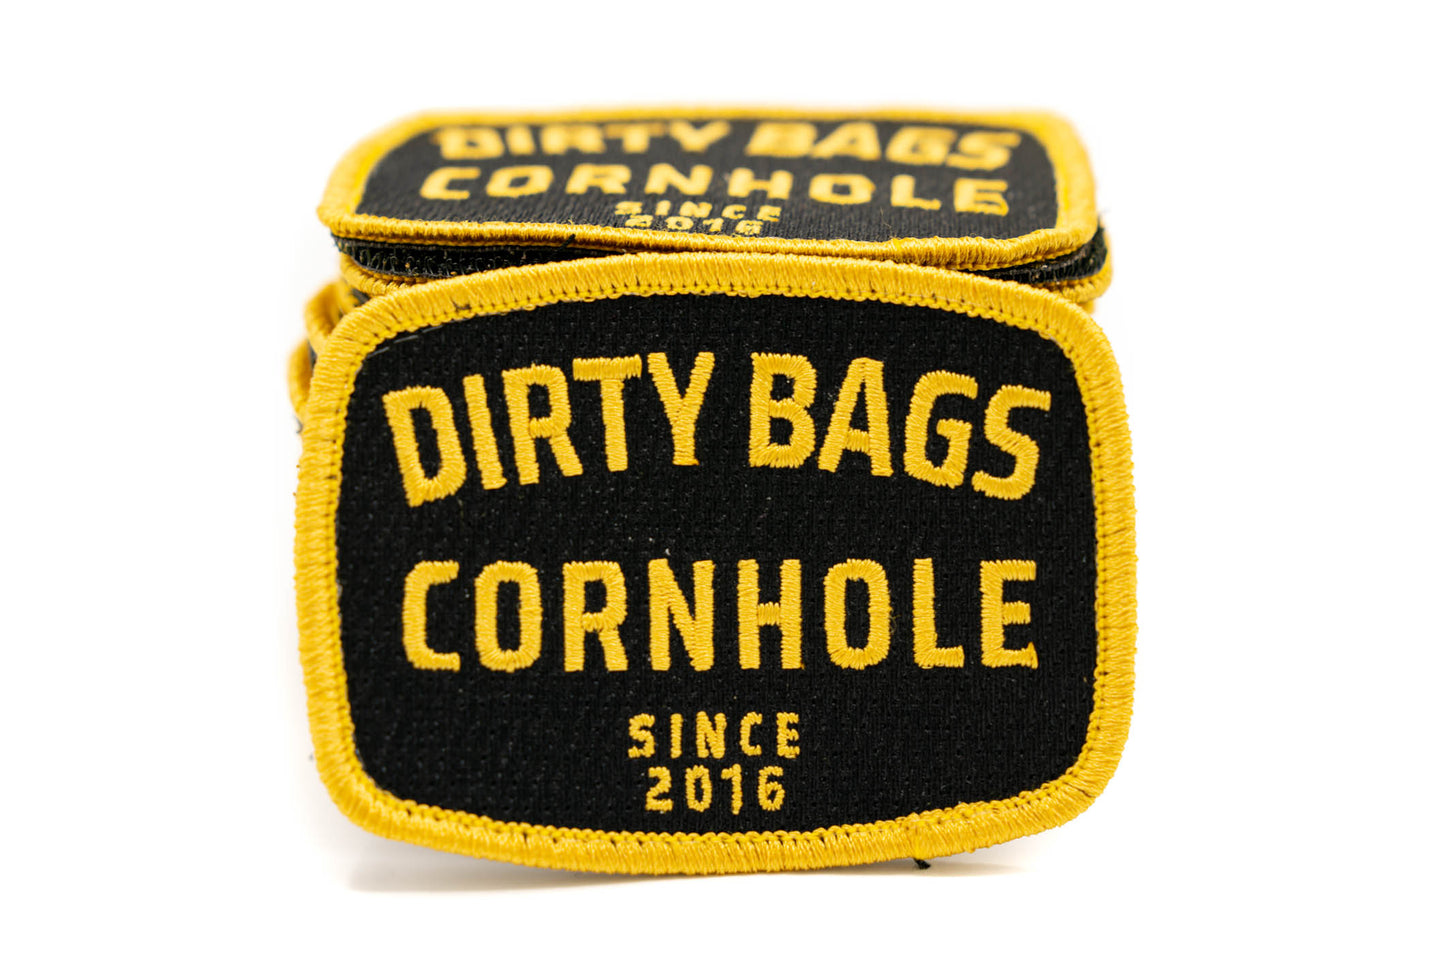 Dirty Bags Cornhole Black and Gold Square Patch